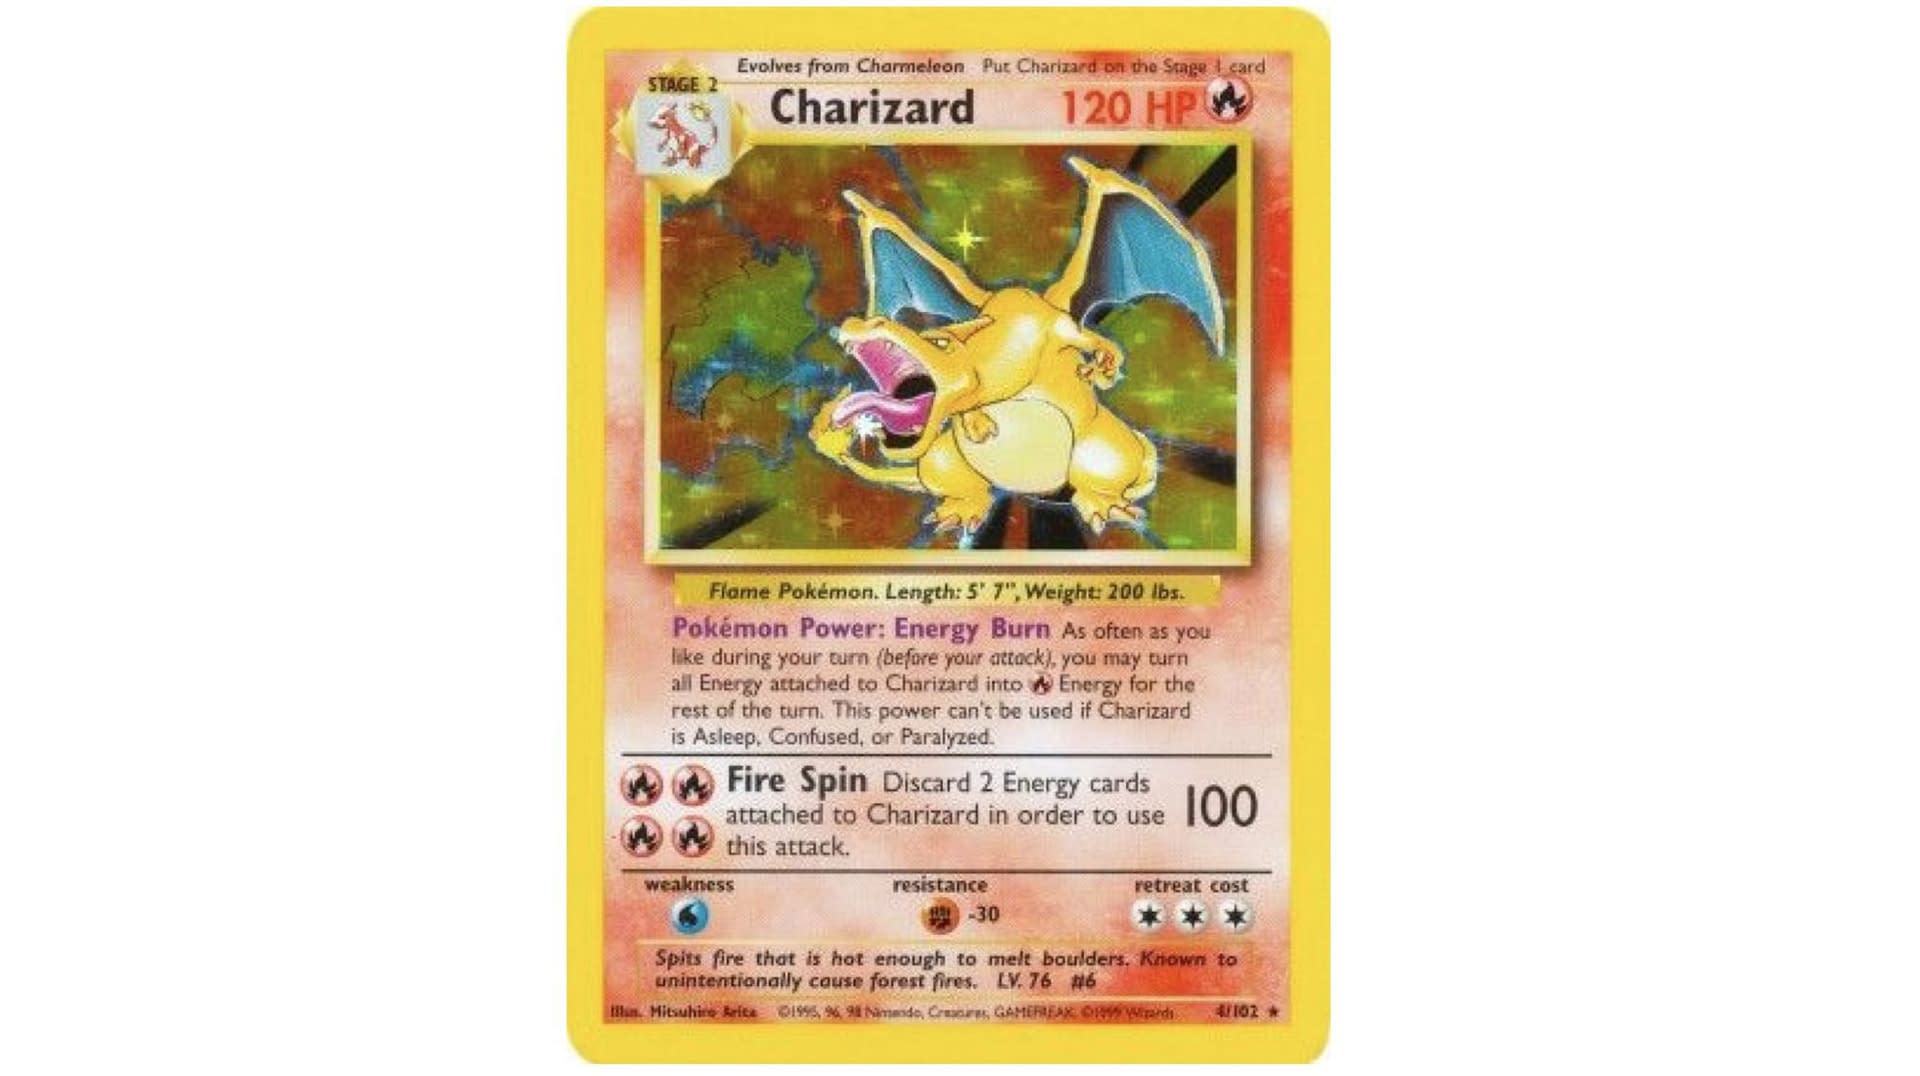 Pokémon cards: What parents need to know - Today's Parent